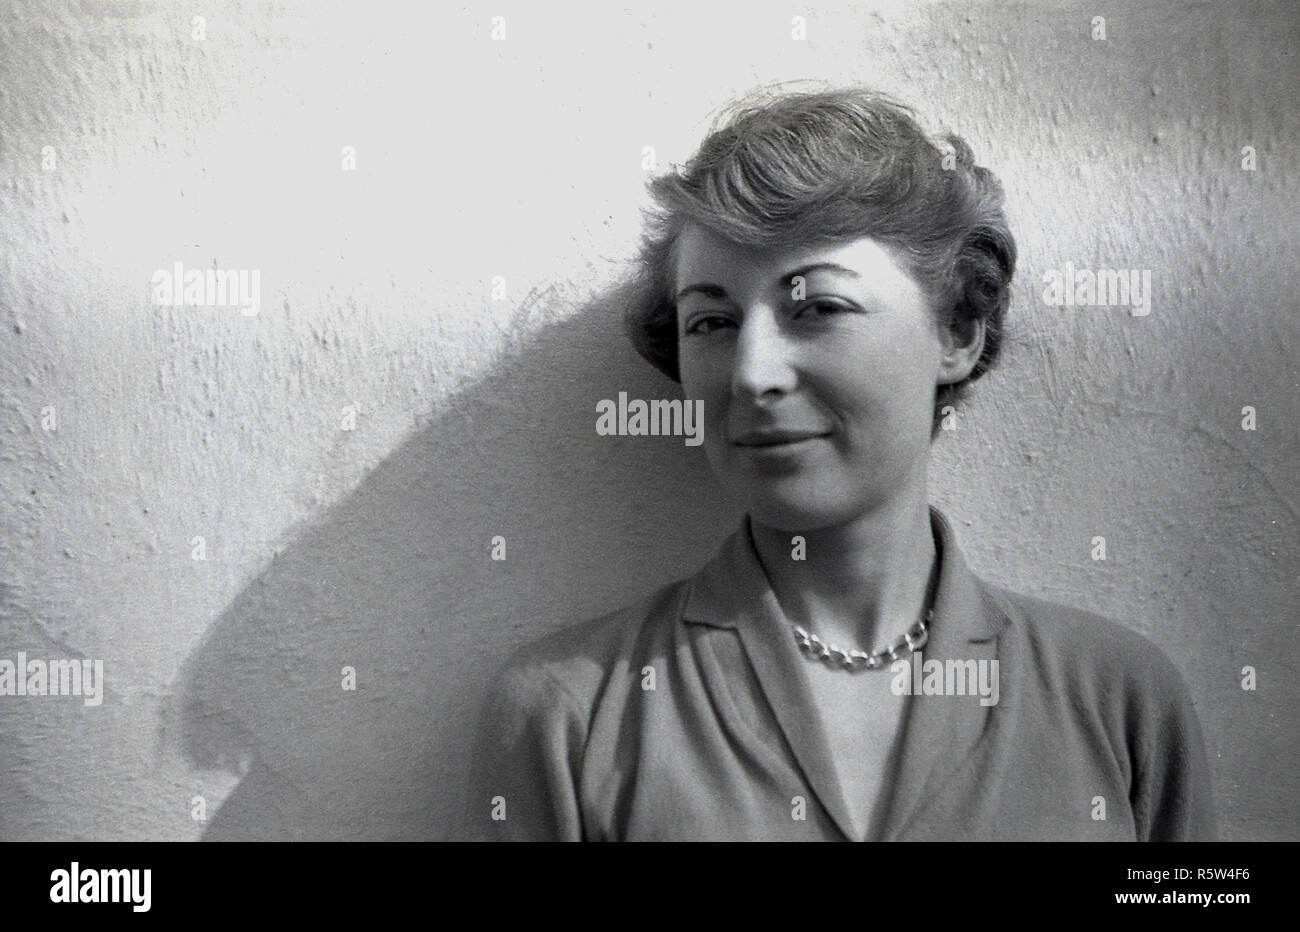 1950s, historical, attractive youg English lady with short wavy hair and wearing a necklace and woollen top standing against a wall, England, UK. Stock Photo